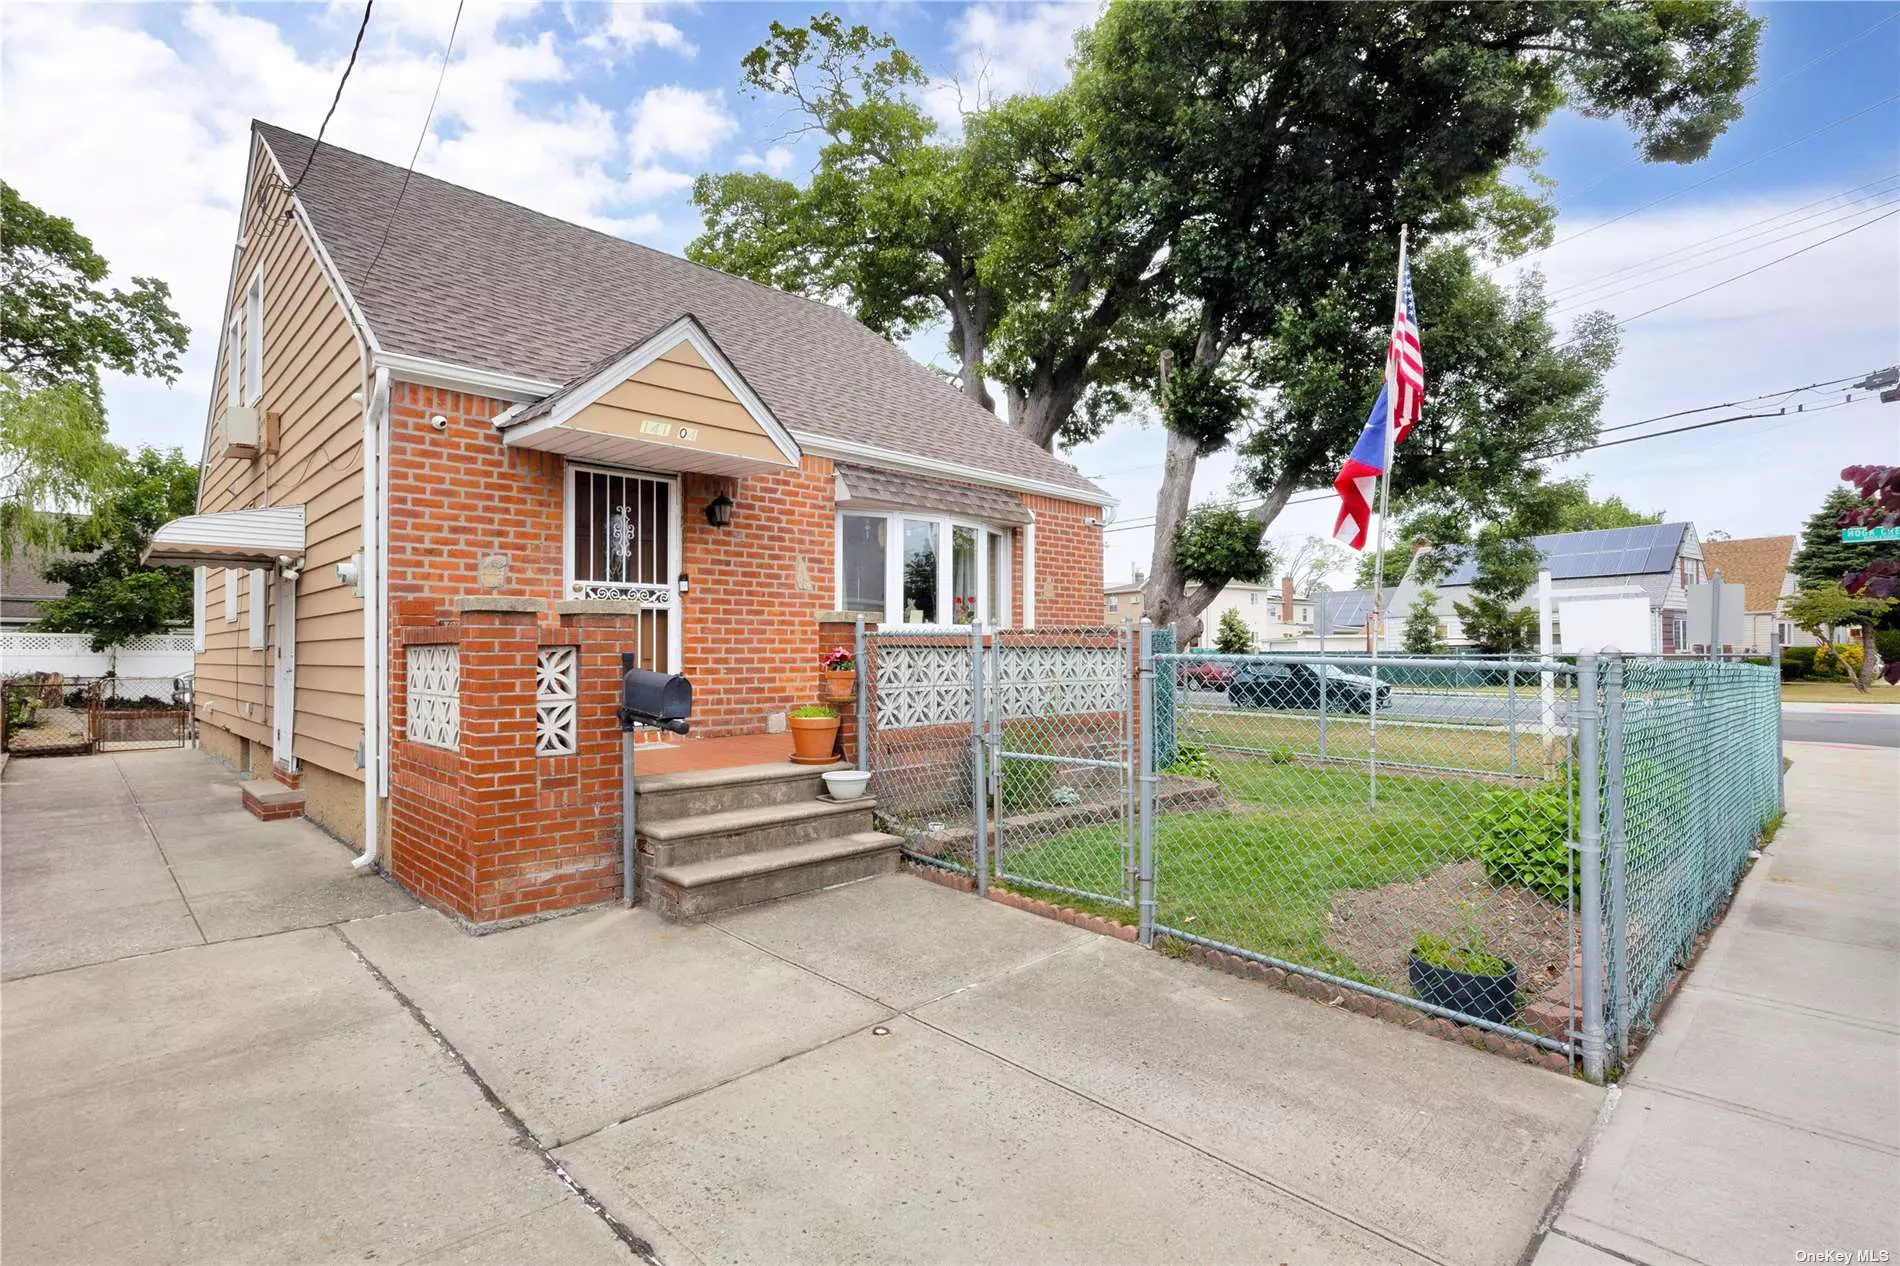 Spacious 1 Family, 4 Bedrooms, 3 Full Bath, Finished Basement and Attic. Ample parking with a spacious yard. Excellent corner property. Close to LIRR, Buses, Green Acres Mall, JFK Airport, etc. Excellent Investment Opportunity!